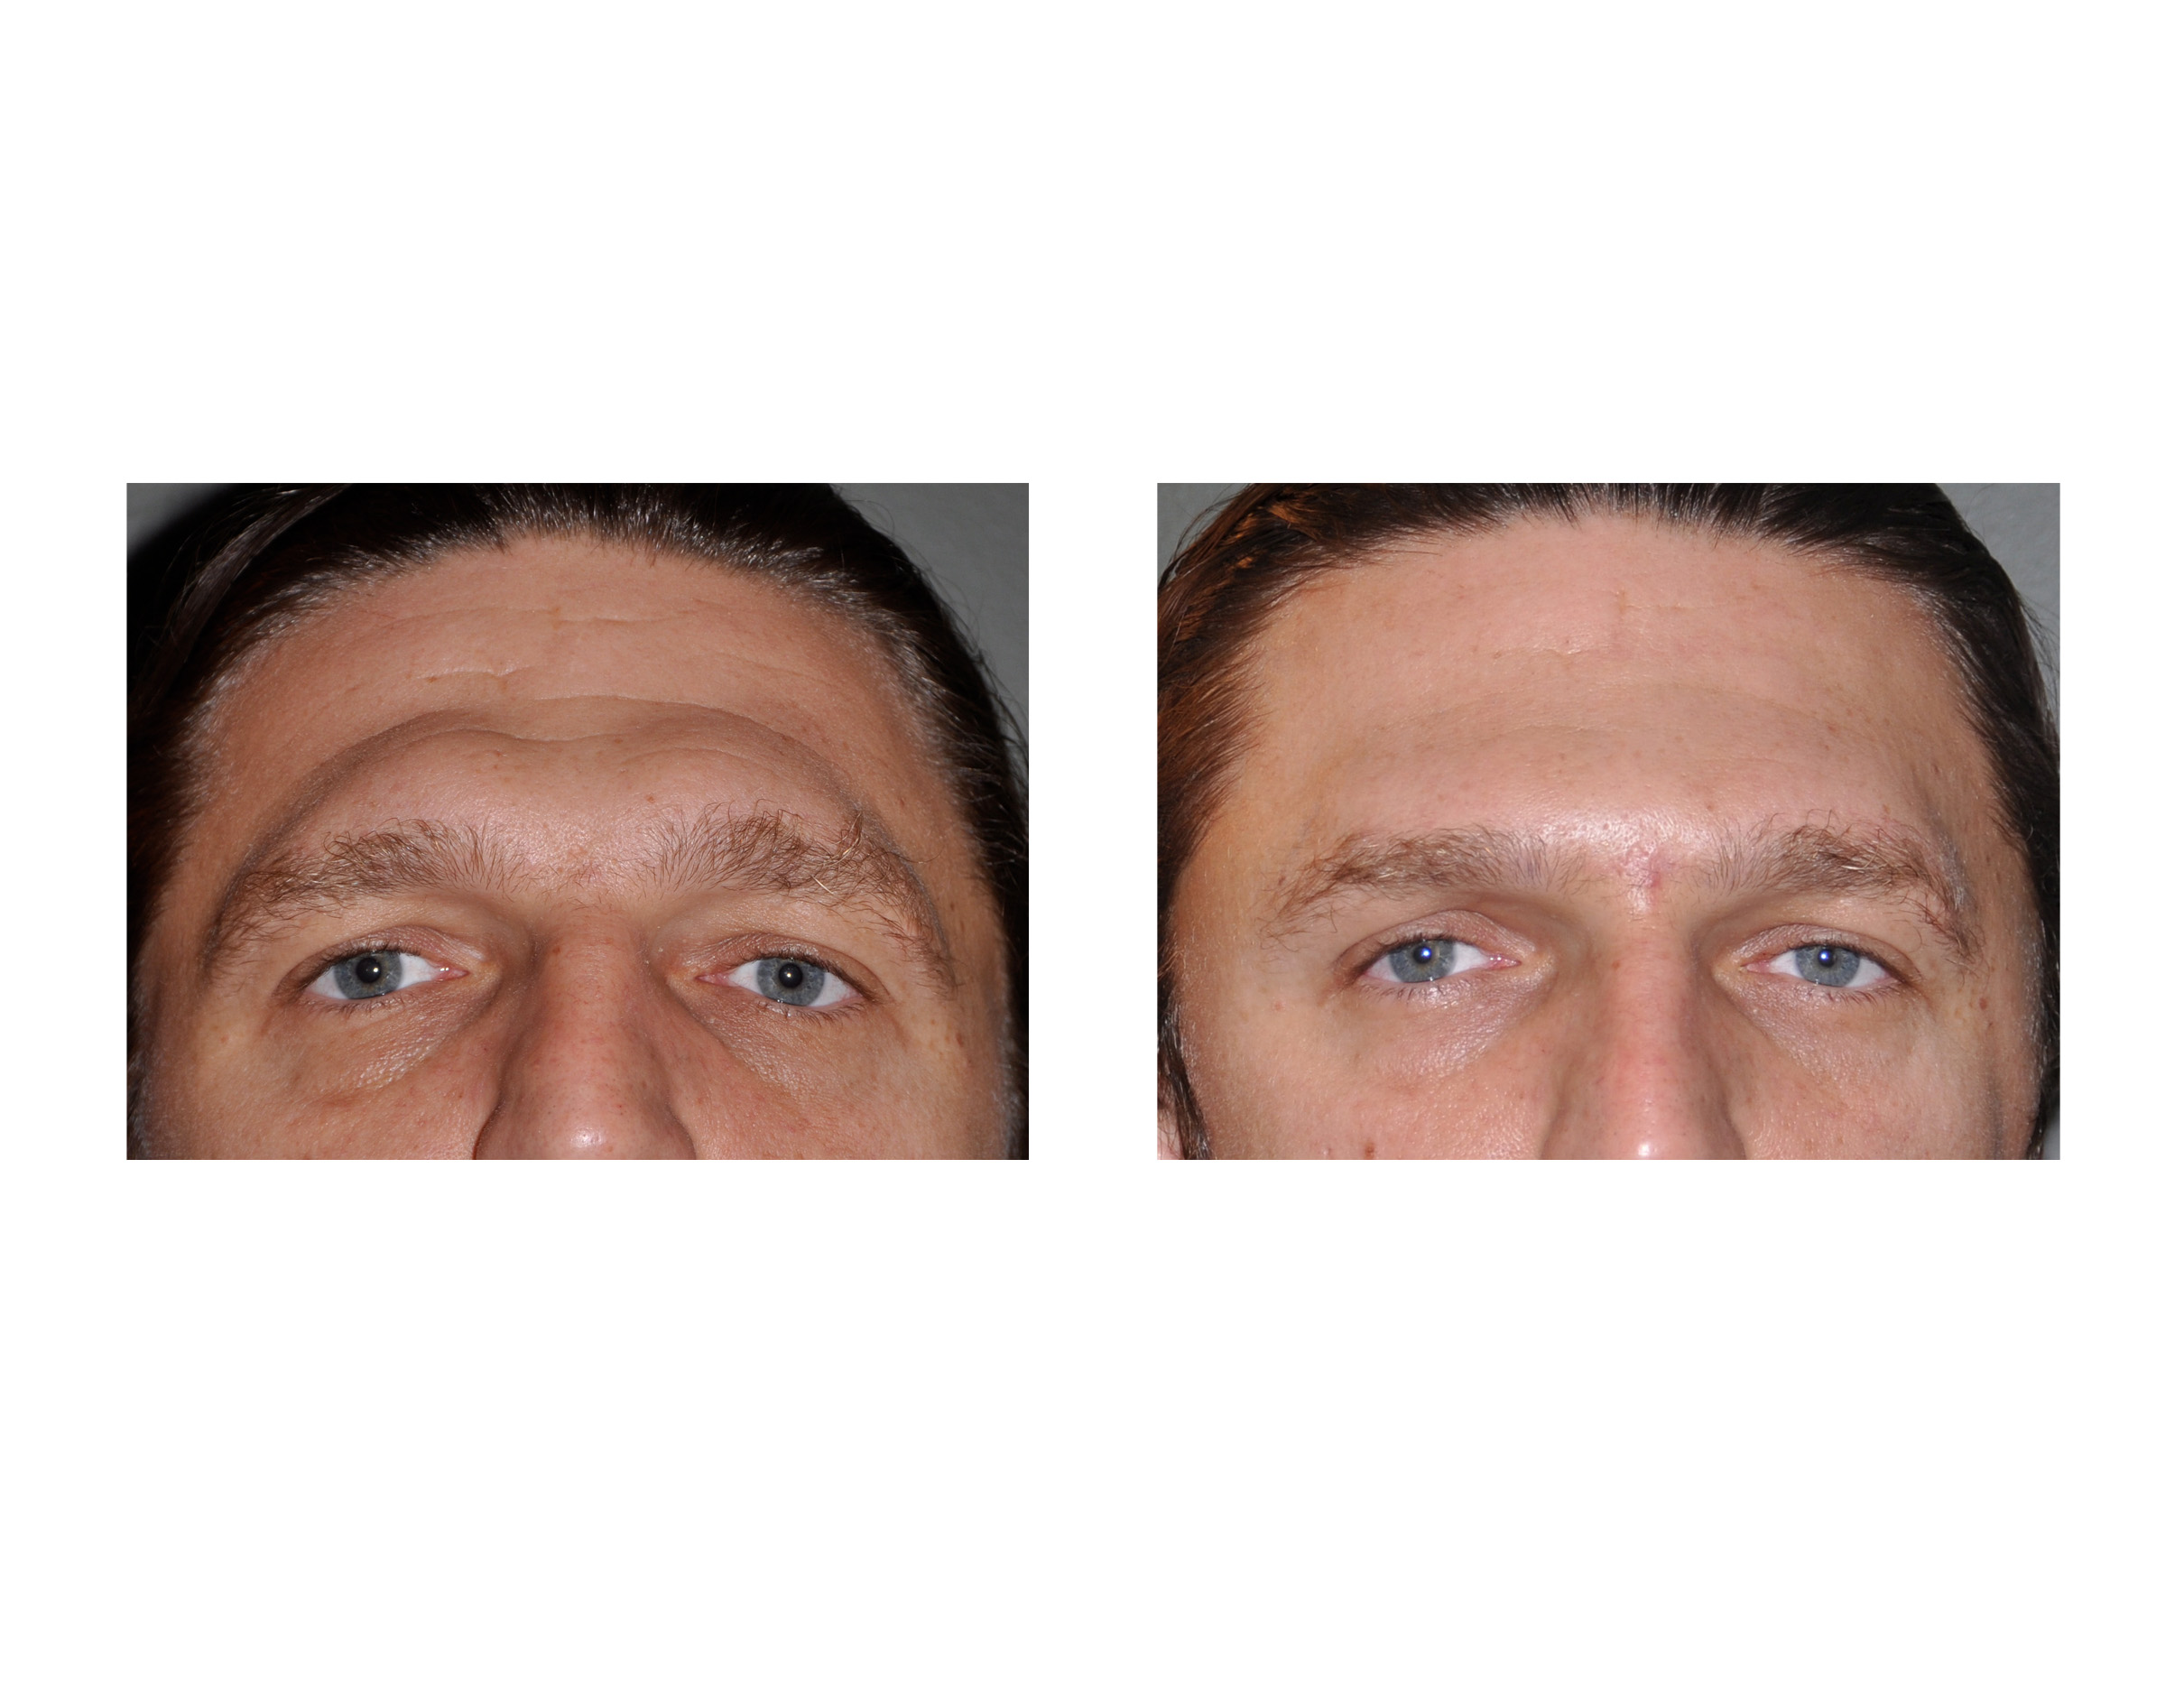 Reduce swelling brusing facial surgery